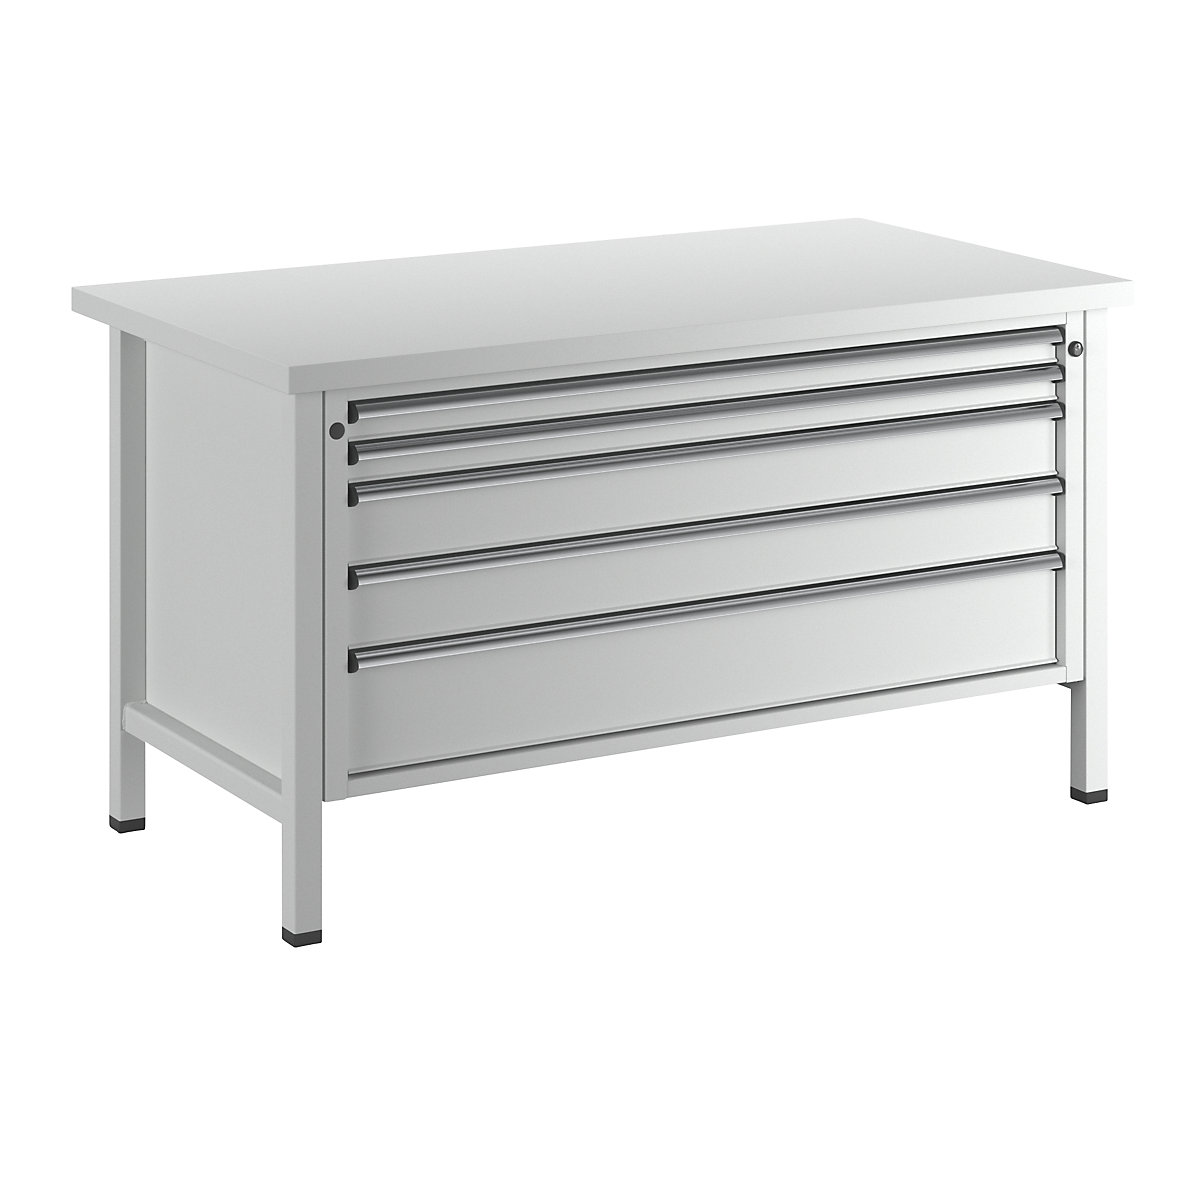 Workbench with XL/XXL drawers, frame construction – ANKE, width 1500 mm, 5 drawers, universal worktop, front in light grey-9